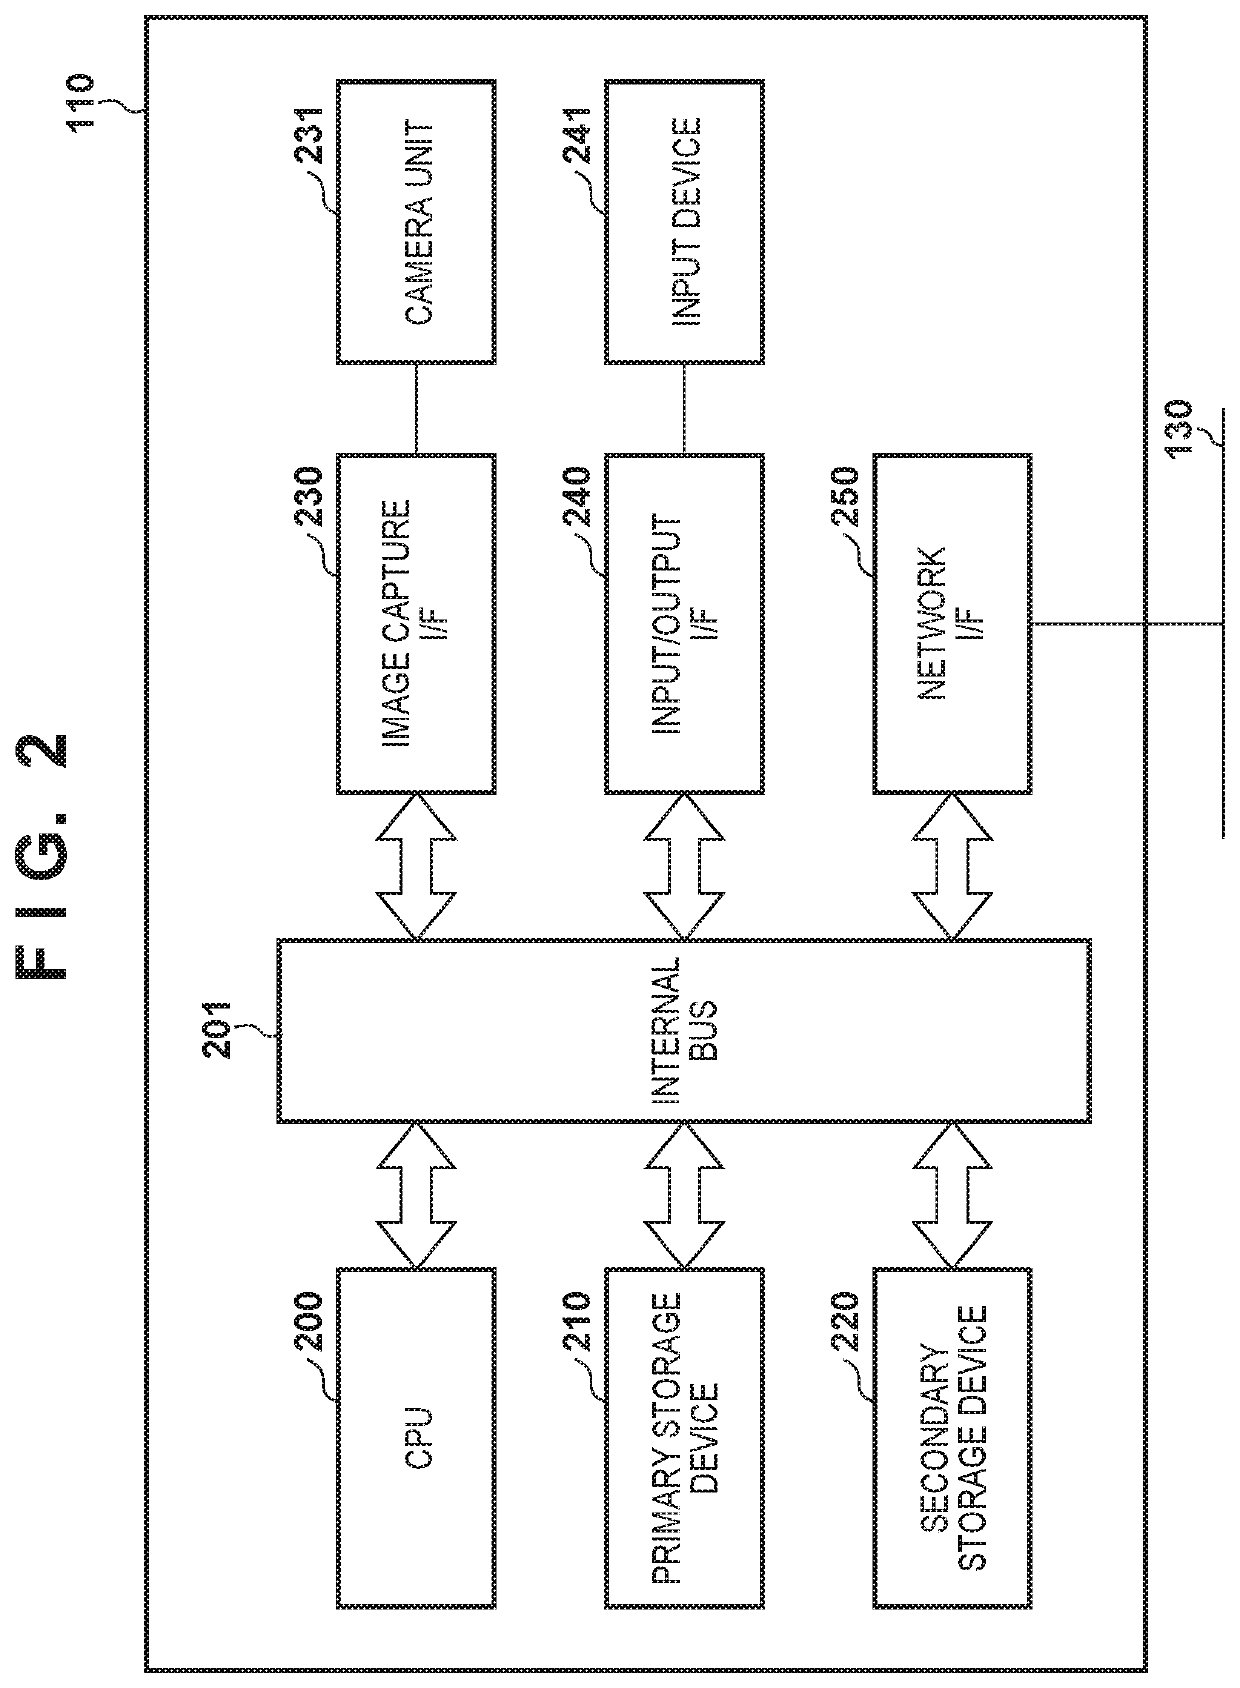 Video display apparatus and control method of video display apparatus